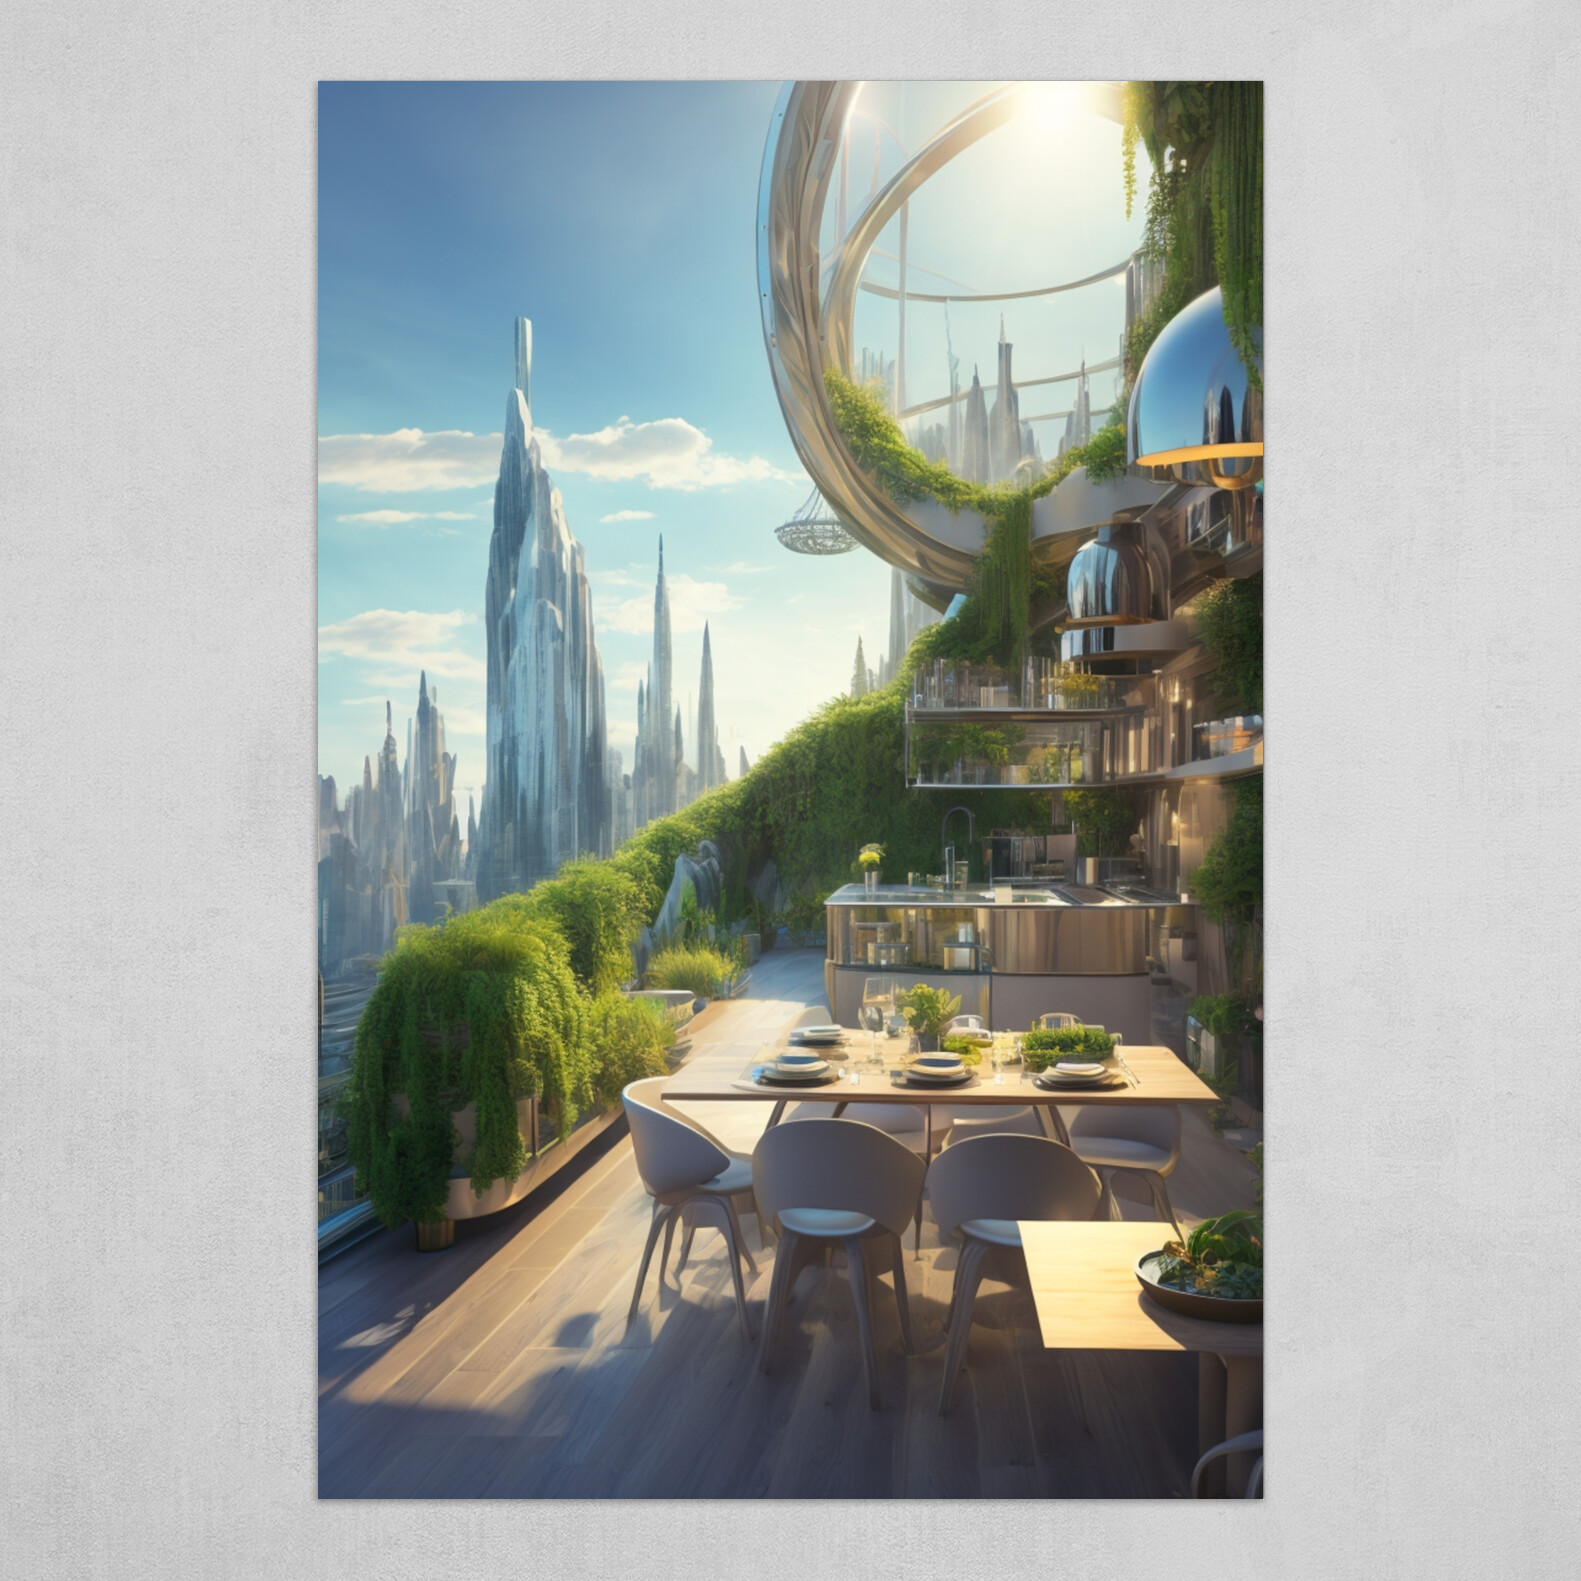 Building a Solarpunk City of the Future: A Step-by-Step Guide! 